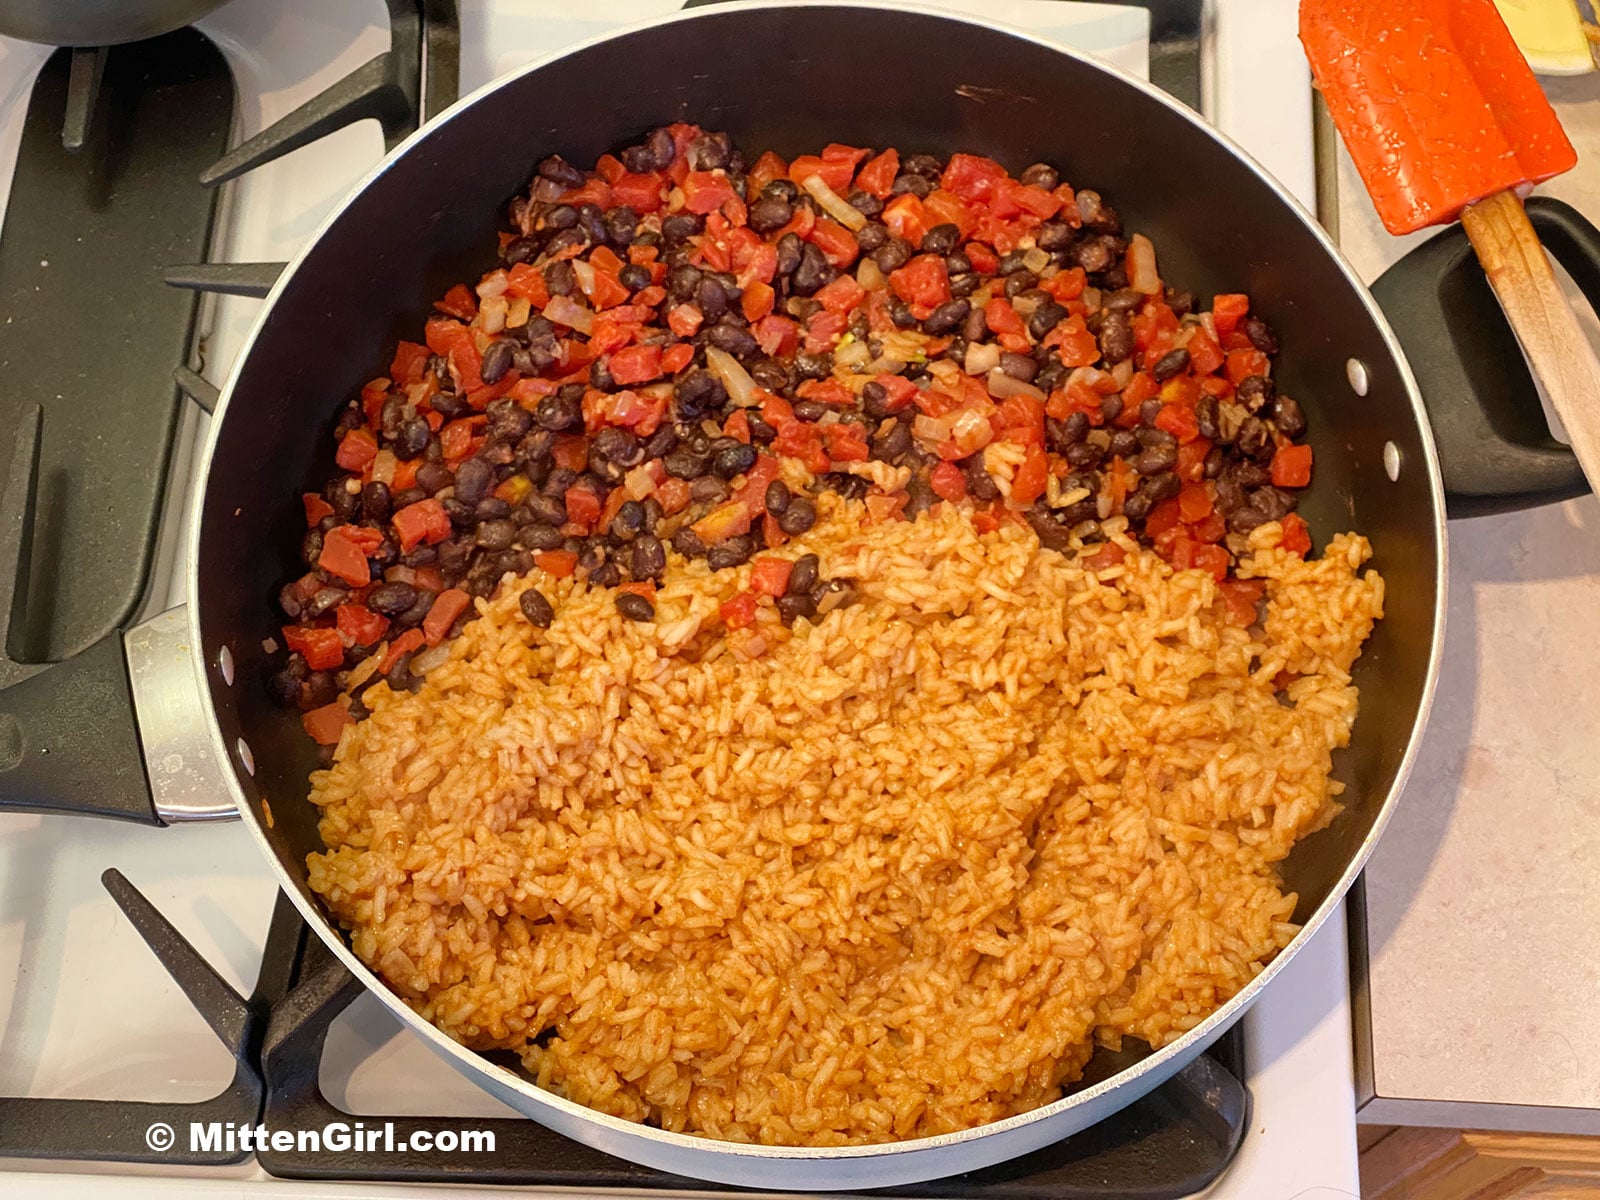 Tomatoes, beans and rice in a skillet